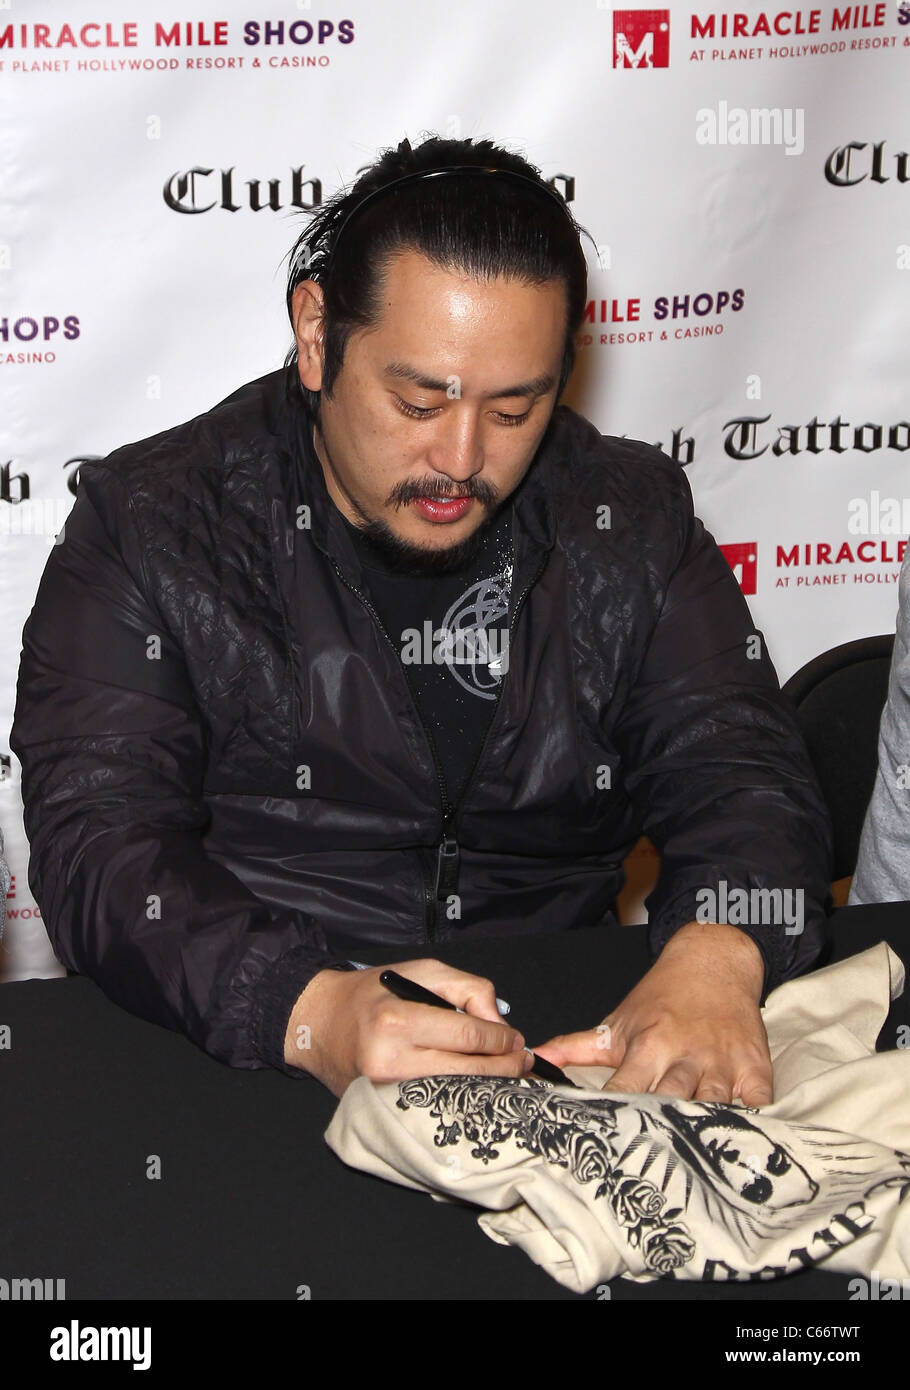 Joe Hahn in attendance for Linkin Park Autograph Signing at Club Tattoo, Miracle Mile Shops at Planet Hollywood Resort and Casino, Las Vegas, NV February 19, 2011. Photo By: MORA/Everett Collection Stock Photo